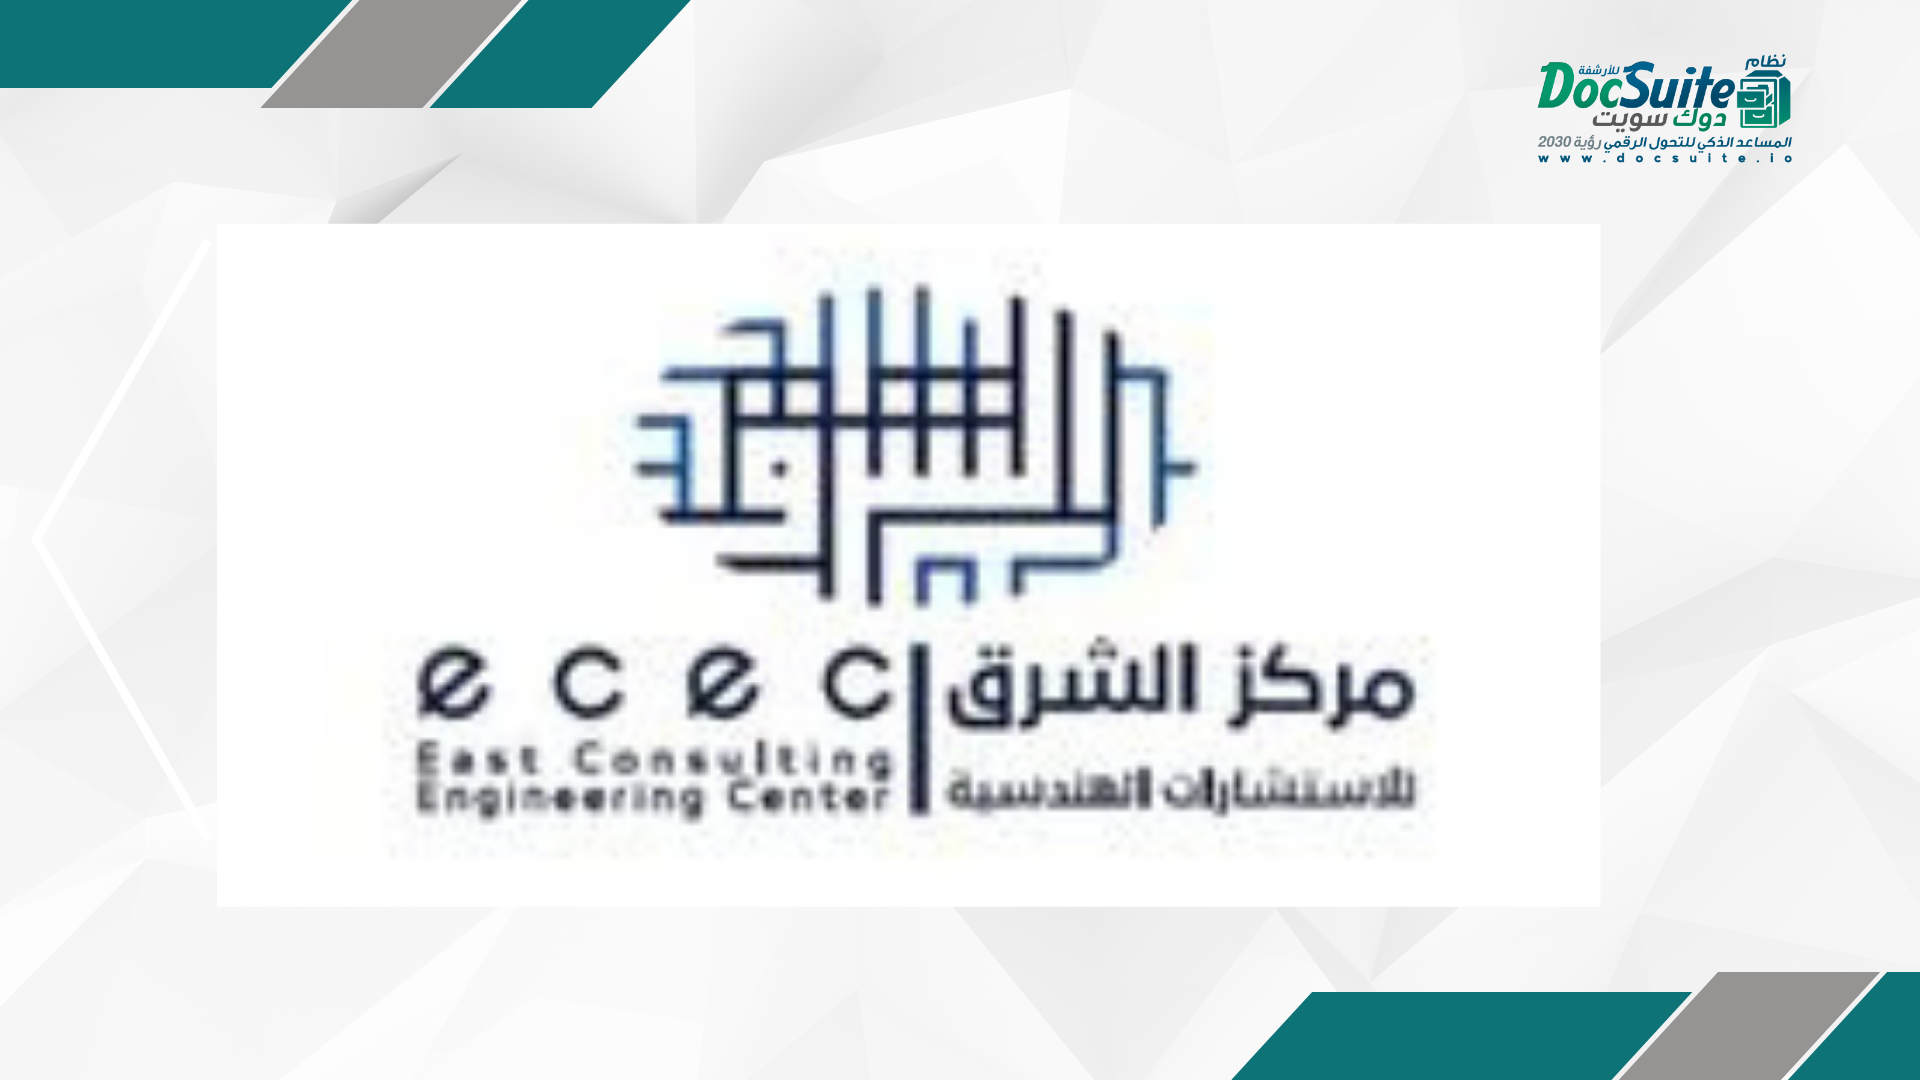 The electronic archiving revolution at Al Sharq Engineering Consulting Company